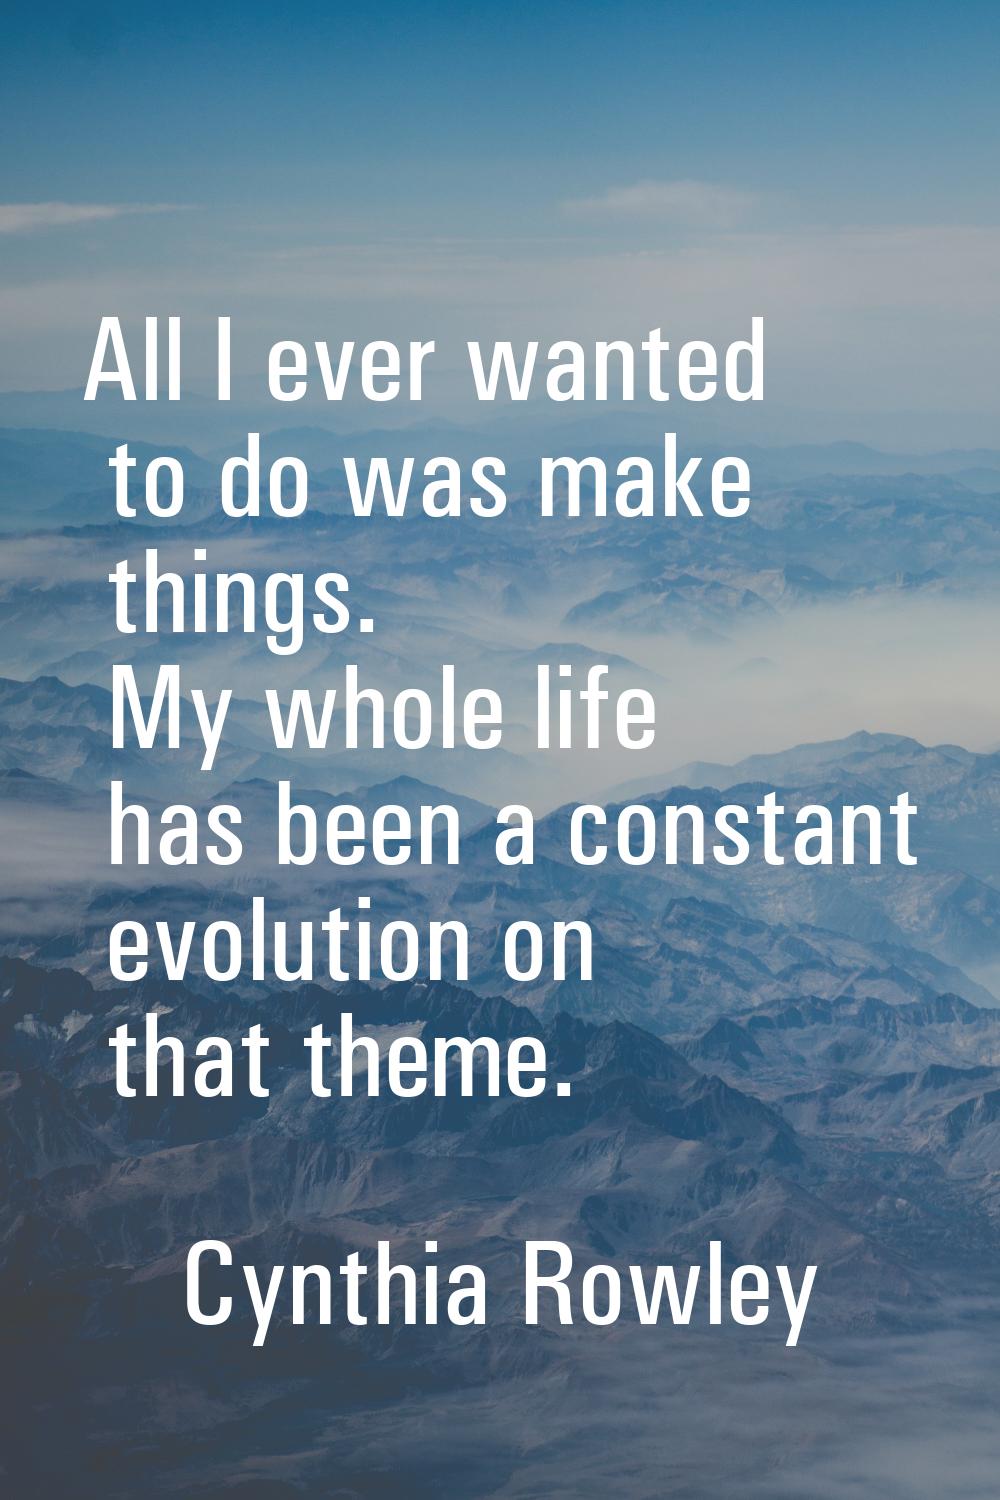 All I ever wanted to do was make things. My whole life has been a constant evolution on that theme.